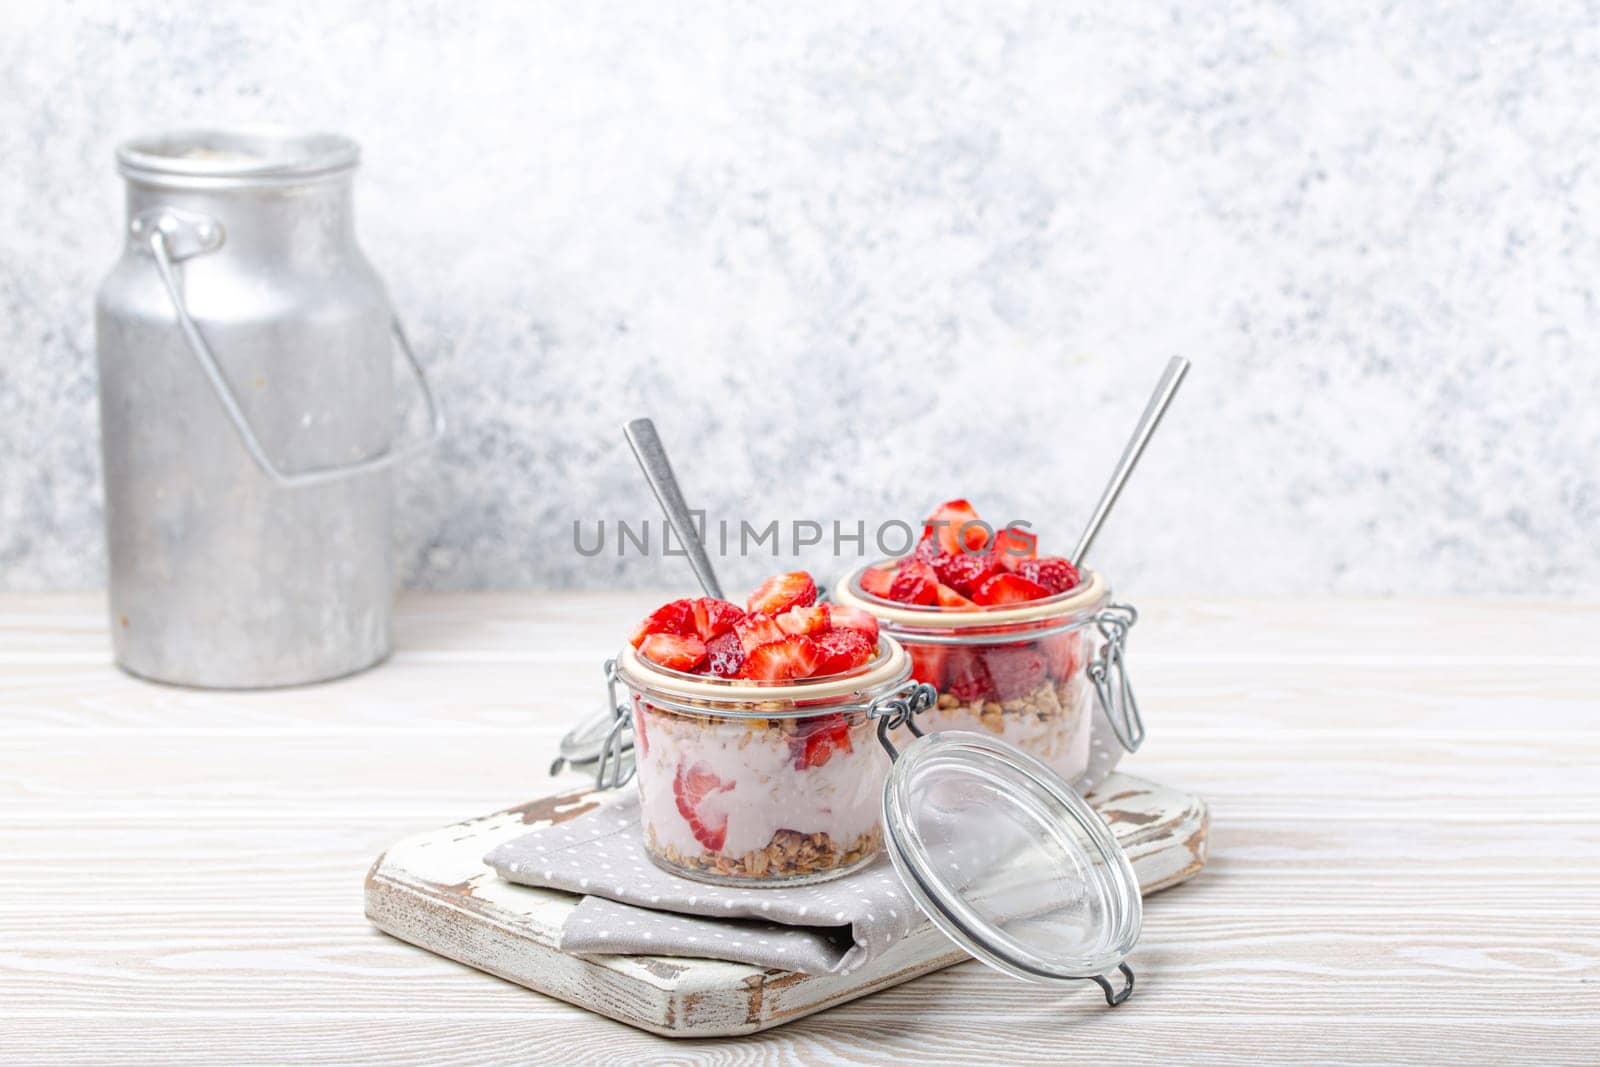 Parfait with Strawberries, Yoghurt and Granola in Transparent Glass Mason Jars on White Rustic Wooden Background from Angle View and Aluminium Milk Can, Healthy Breakfast or Summer Dessert, Copy Space